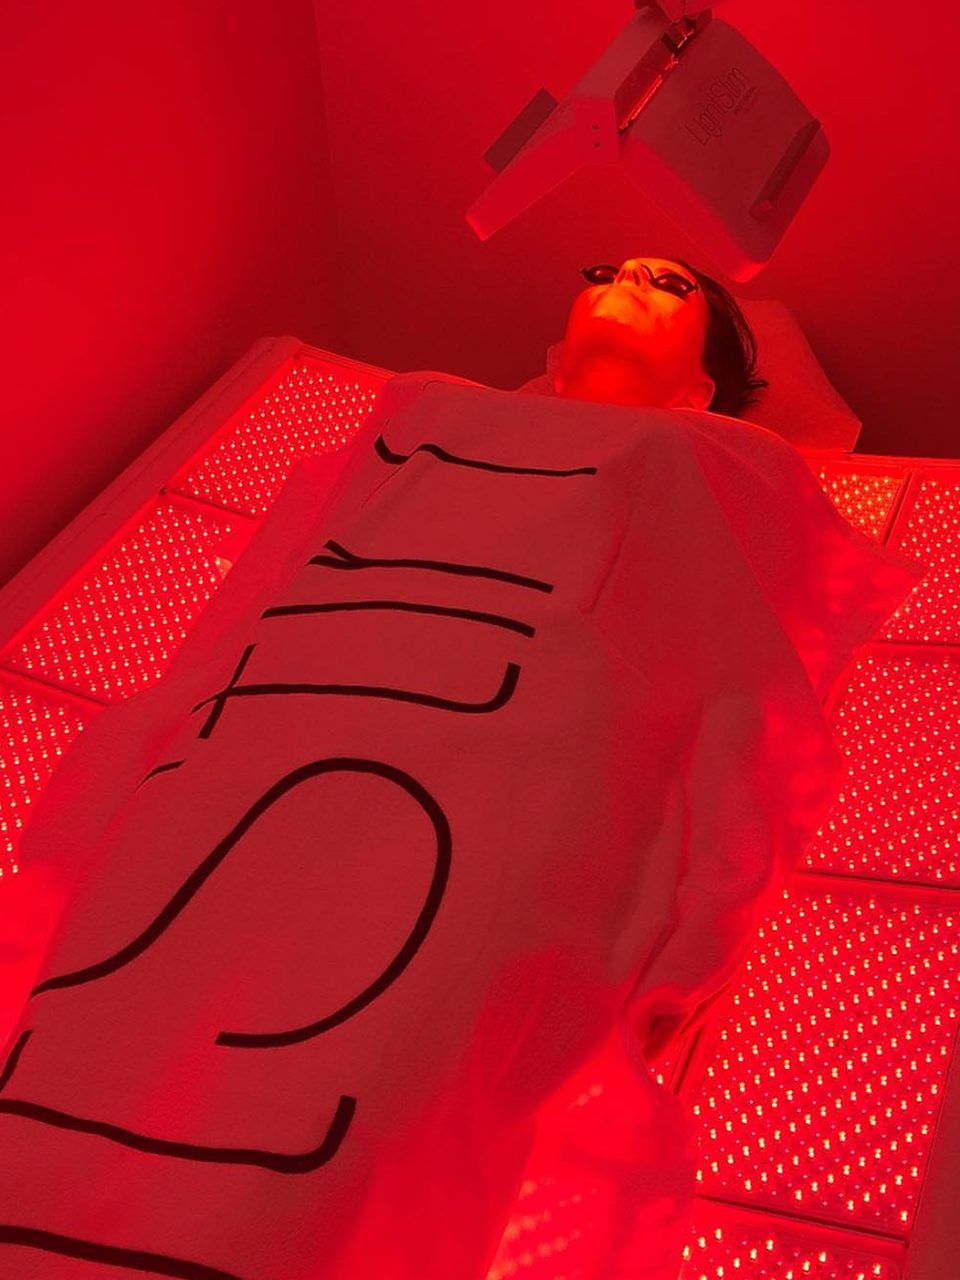 red led light therapy Singapore